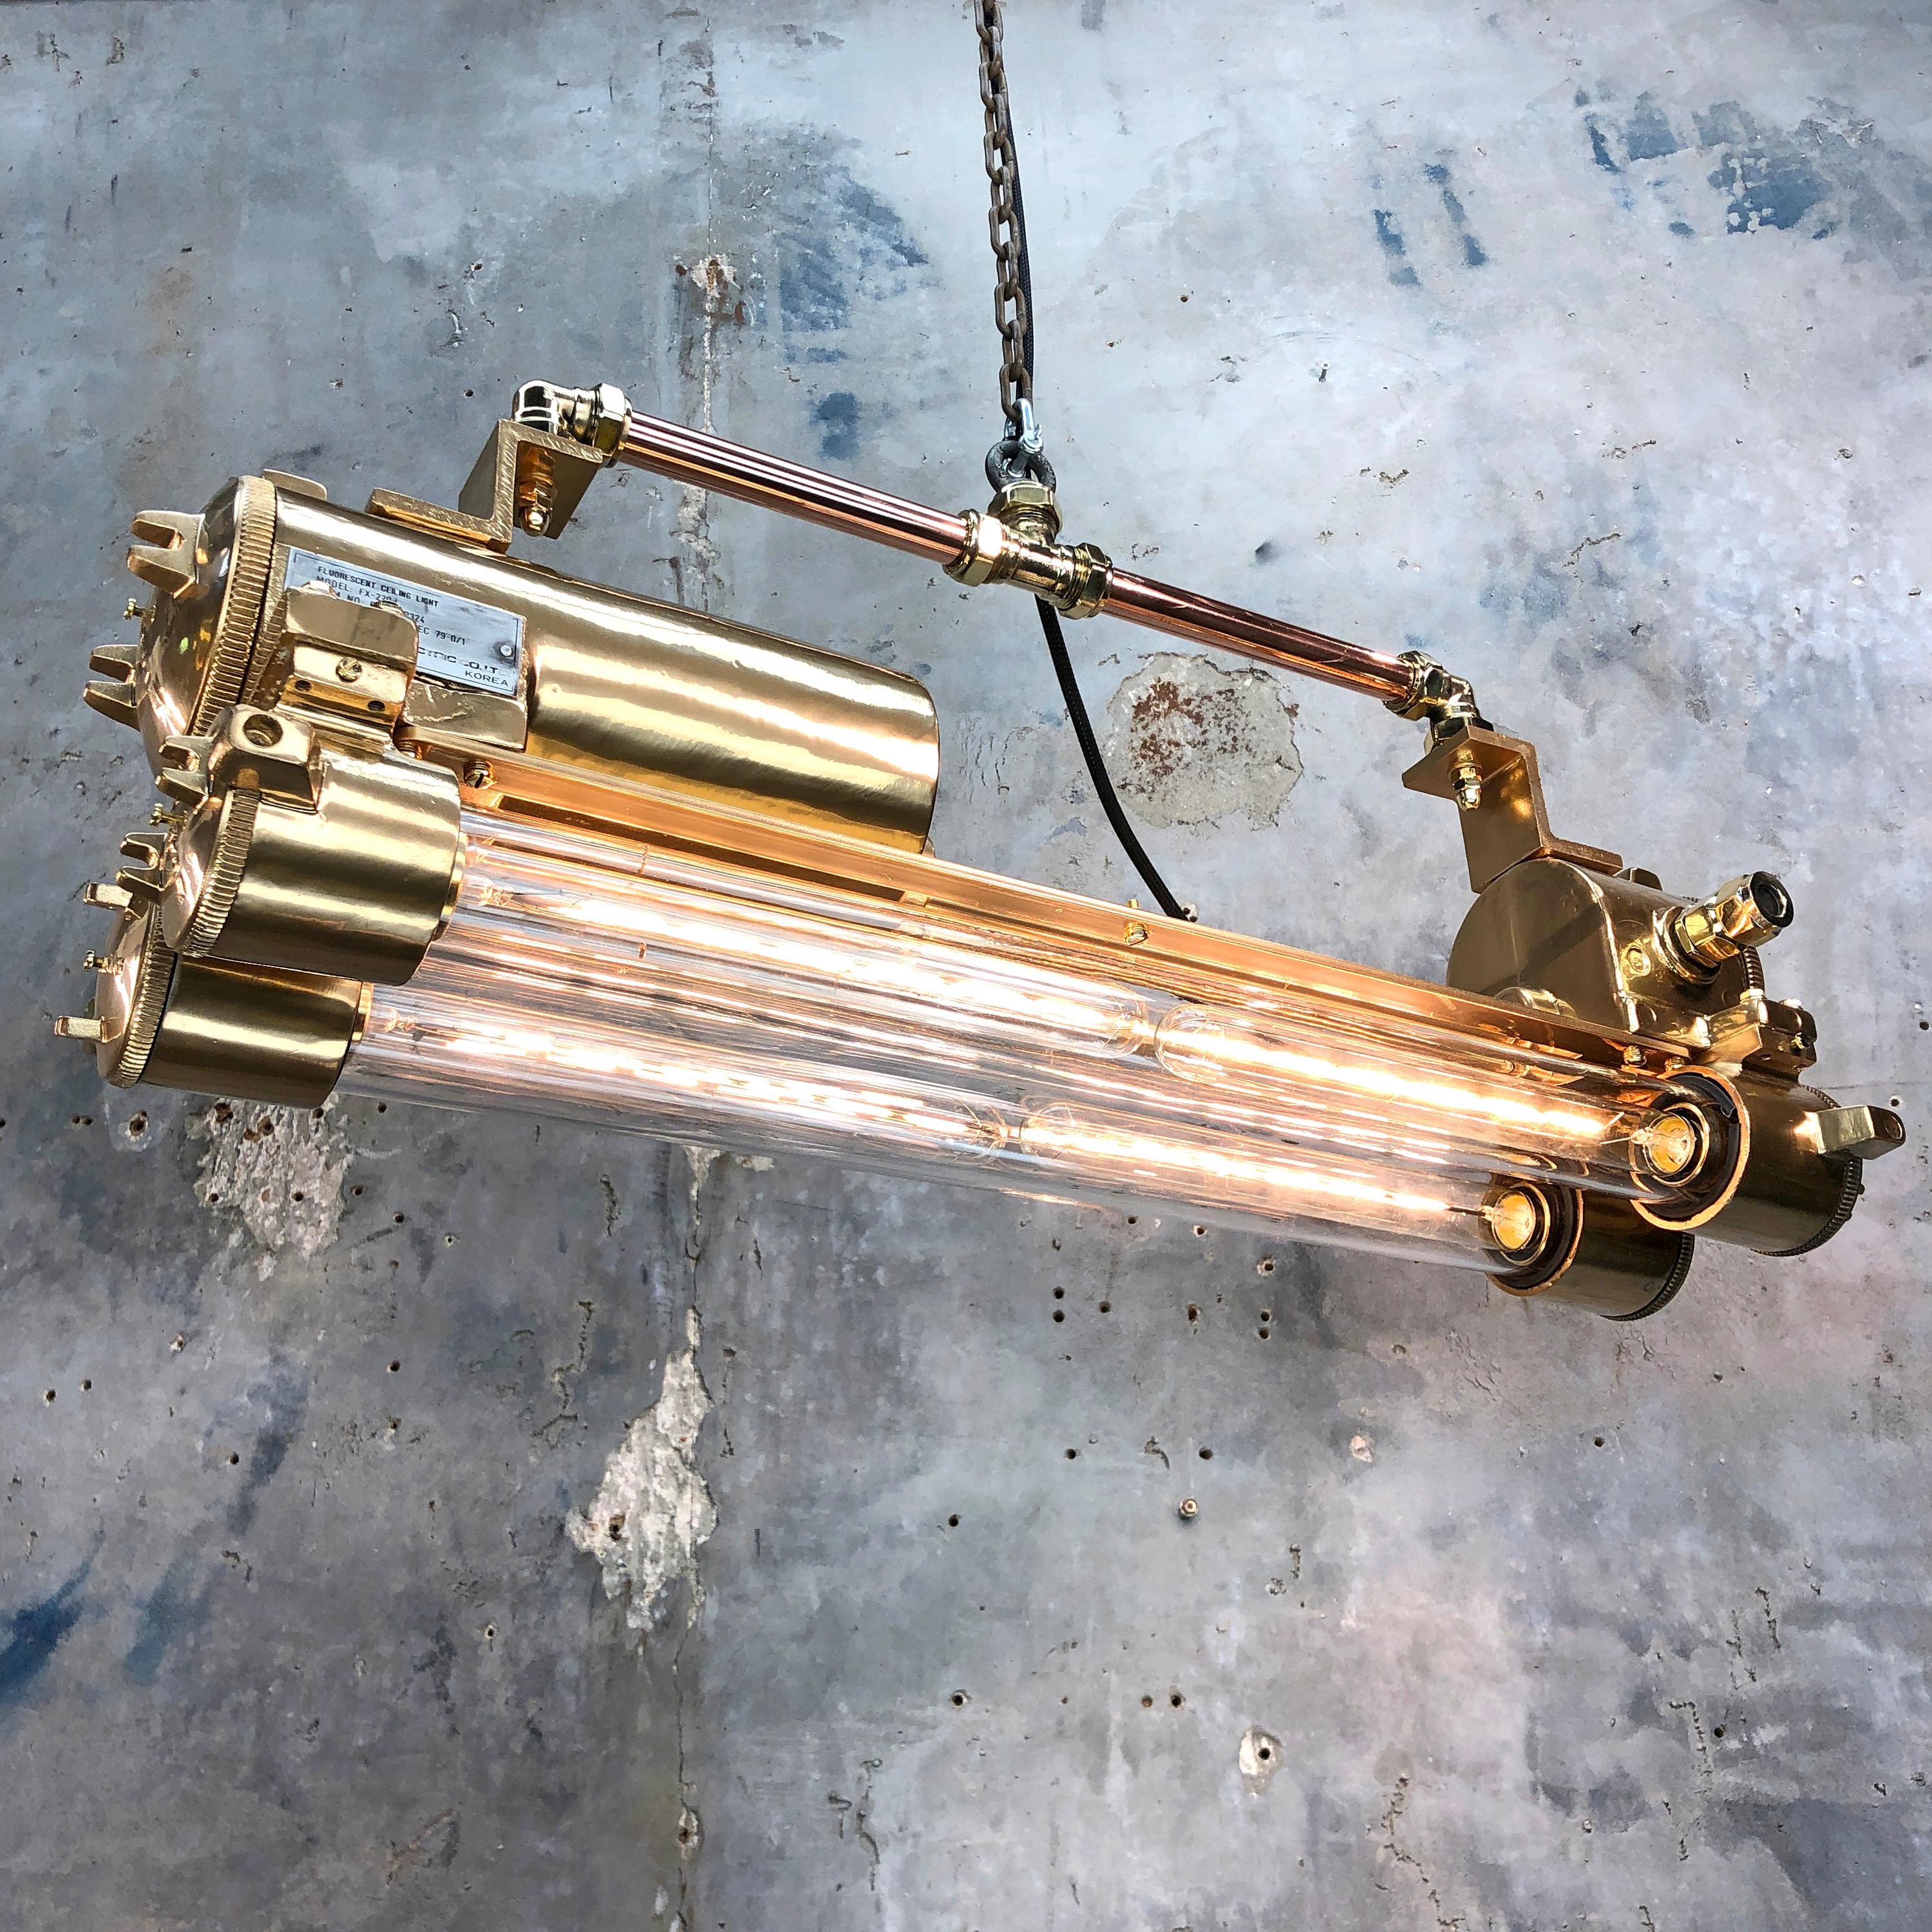 Reclaimed vintage industrial Korean flameproof striplight made by Daeyang in the 1970's finished with mirror gold acrylic and adjustable suspension bar.

Original item salvaged from supertankers and military vessels then professionally restored